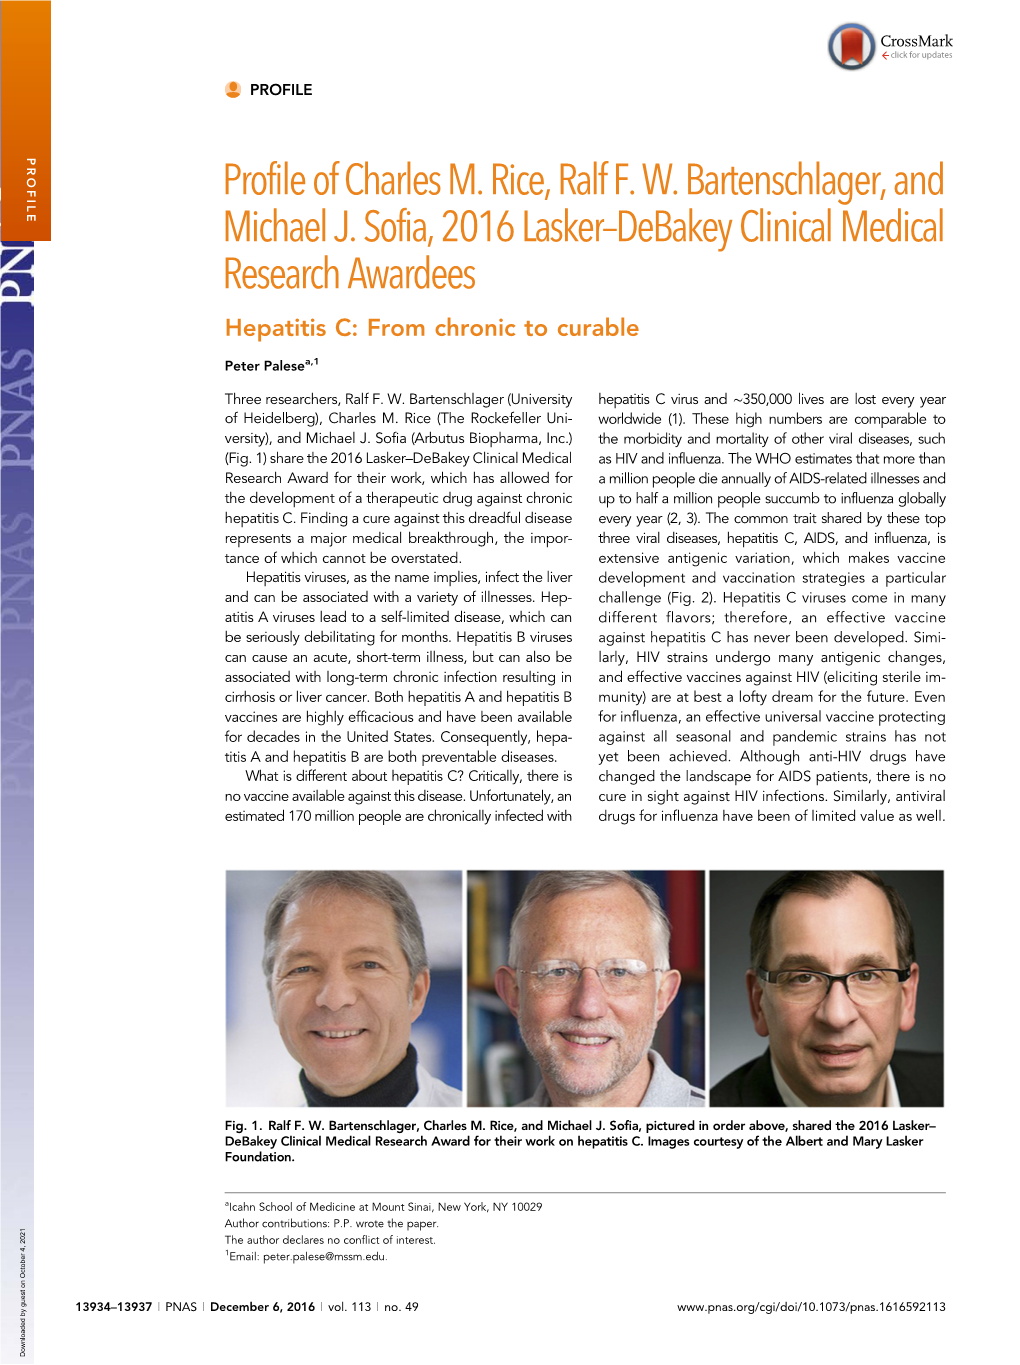 Profile of Charles M. Rice, Ralf F. W. Bartenschlager, and Michael J. Sofia, 2016 Lasker–Debakey Clinical Medical Research